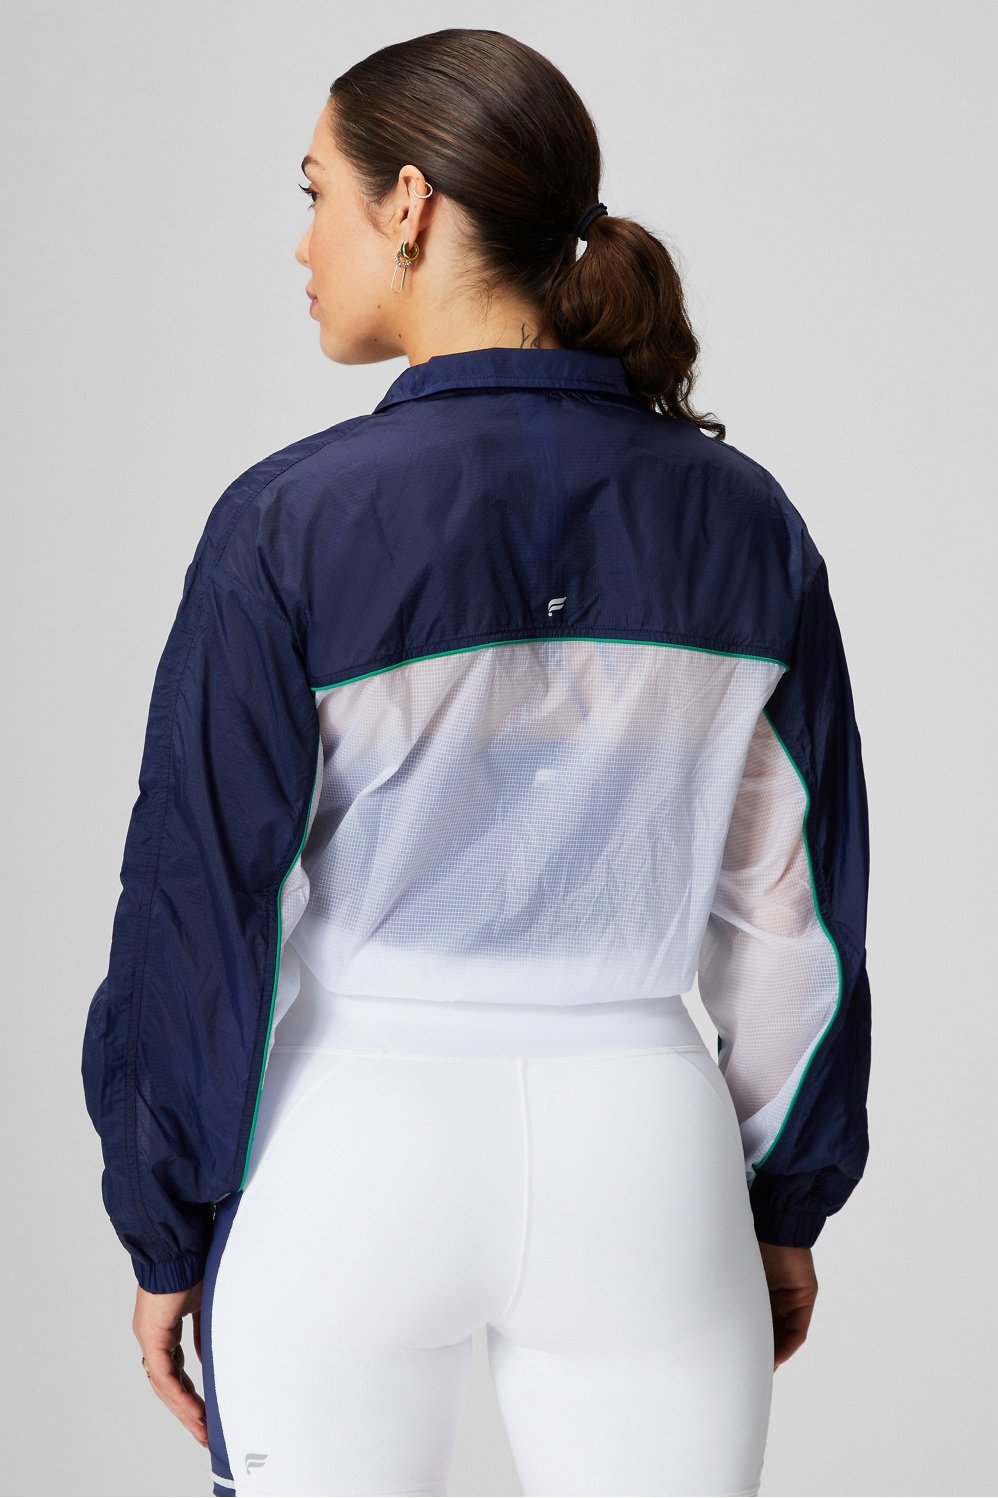 NEW YITTY DROP - Fabletics